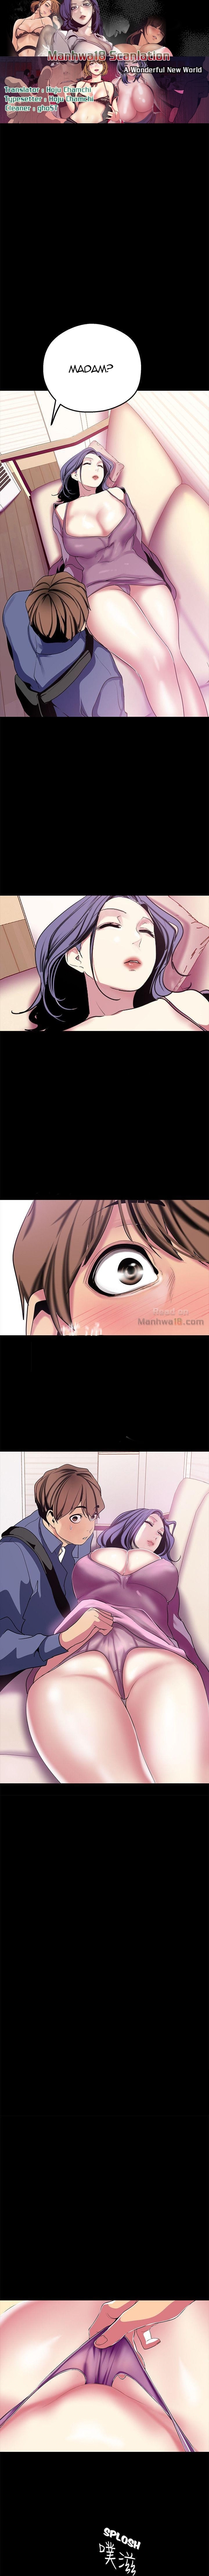 Panel Image 1 for chapter 20 of manhwa A Wonderful New World on read.oppai.stream